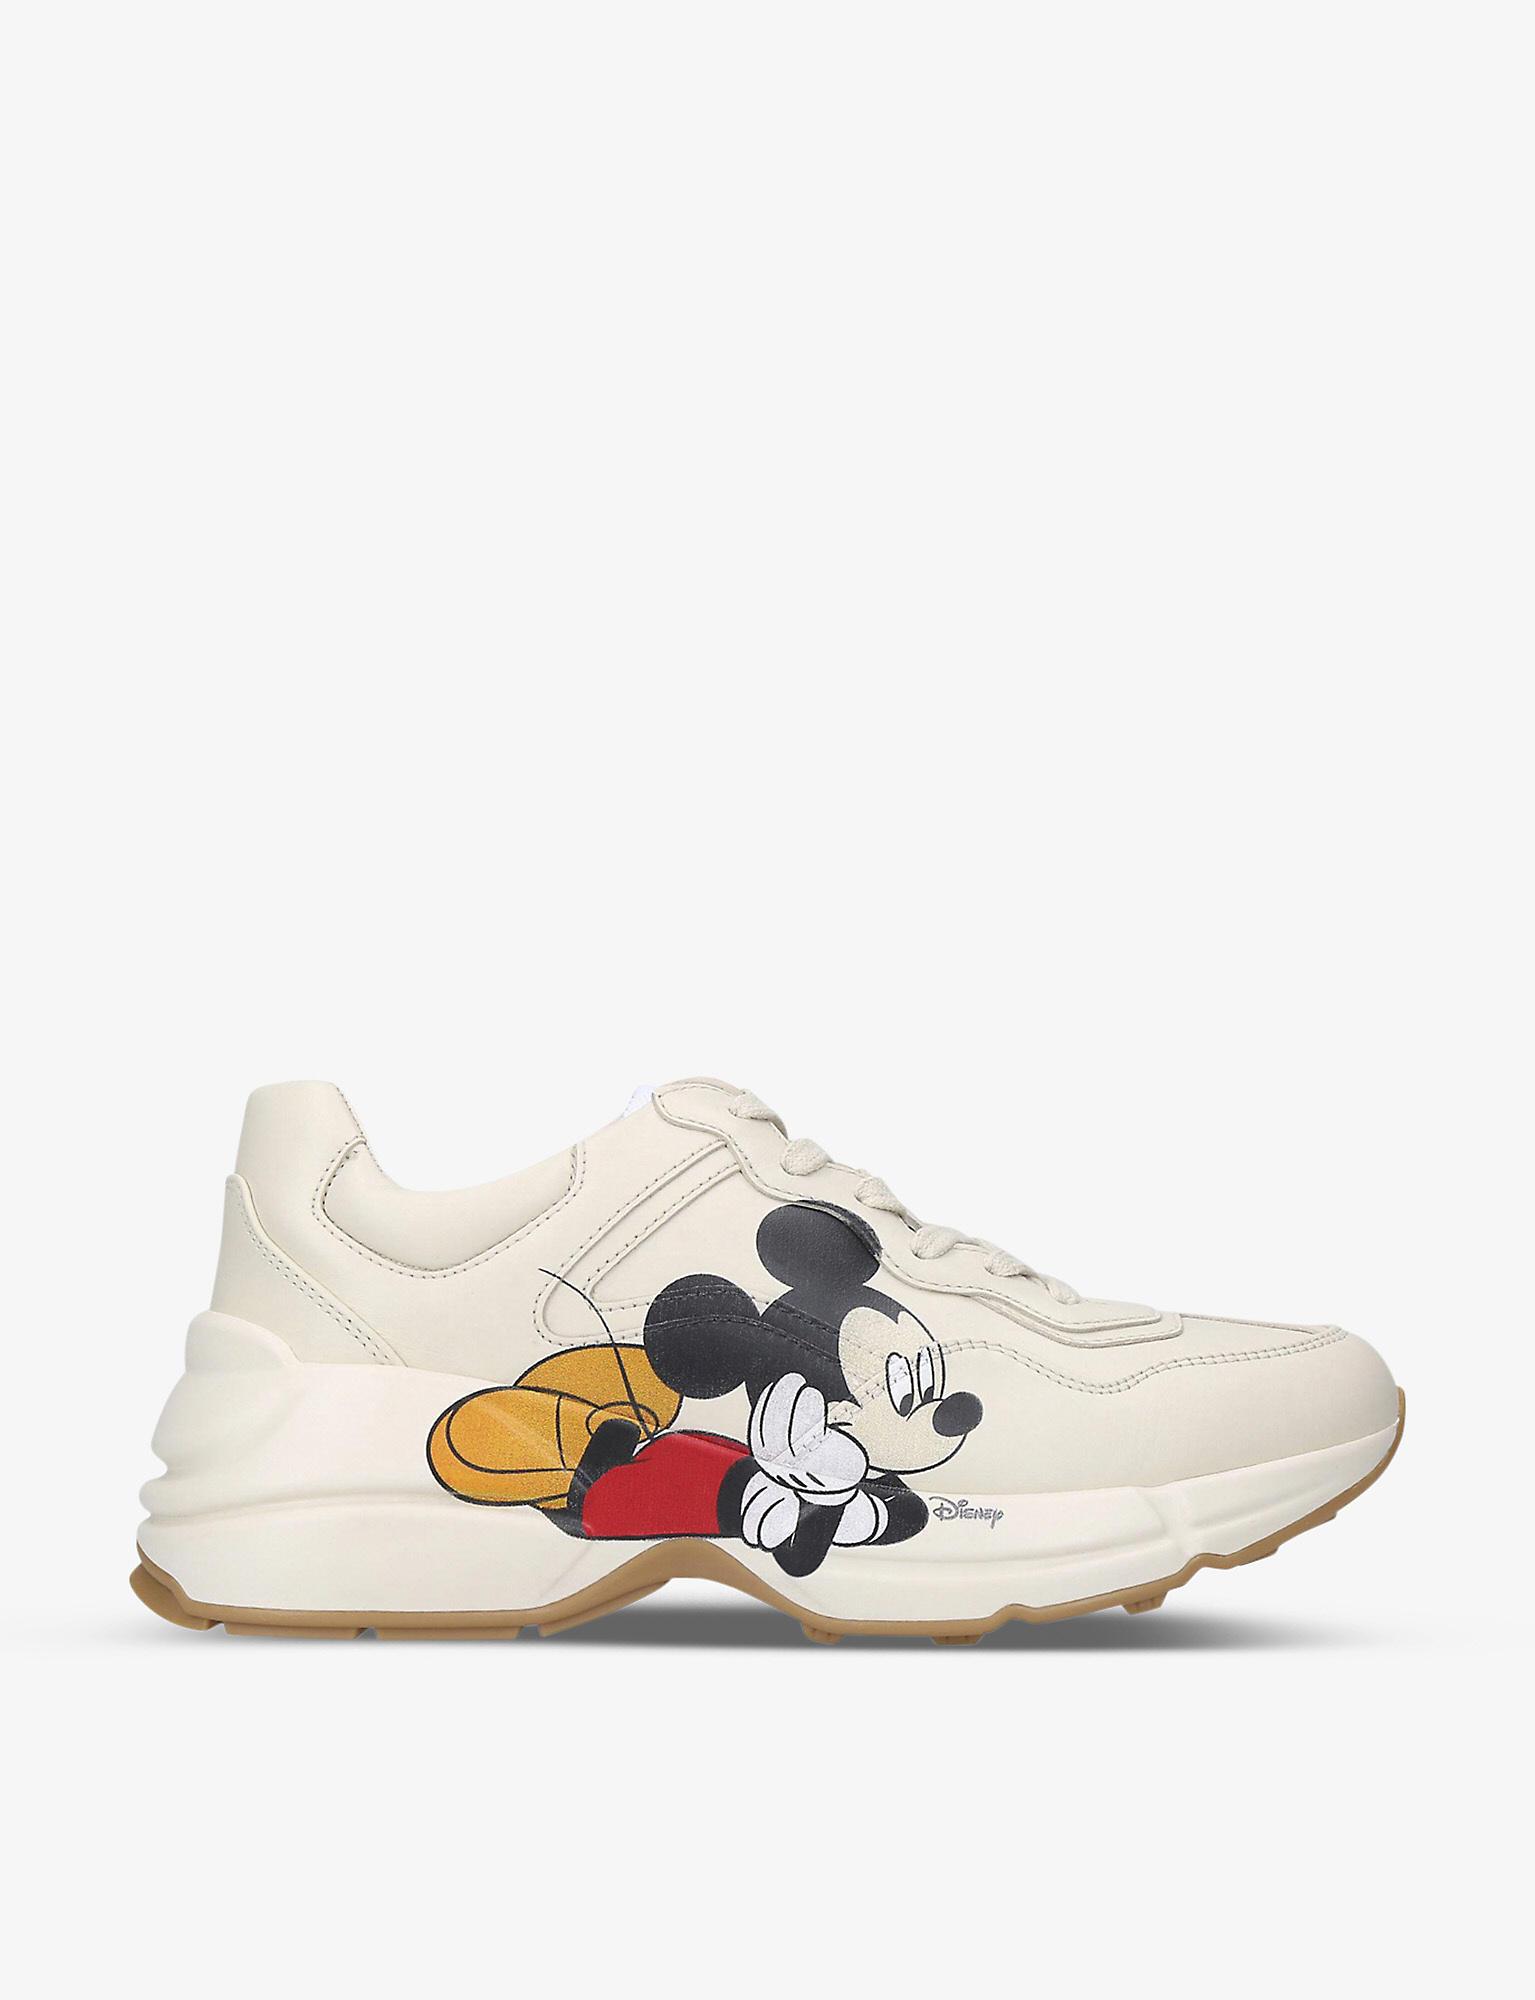 Mobiliseren Geduld Vernederen Gucci Women's X Disney Mickey Mouse Rhyton Leather Mid-top Trainers in  White | Lyst